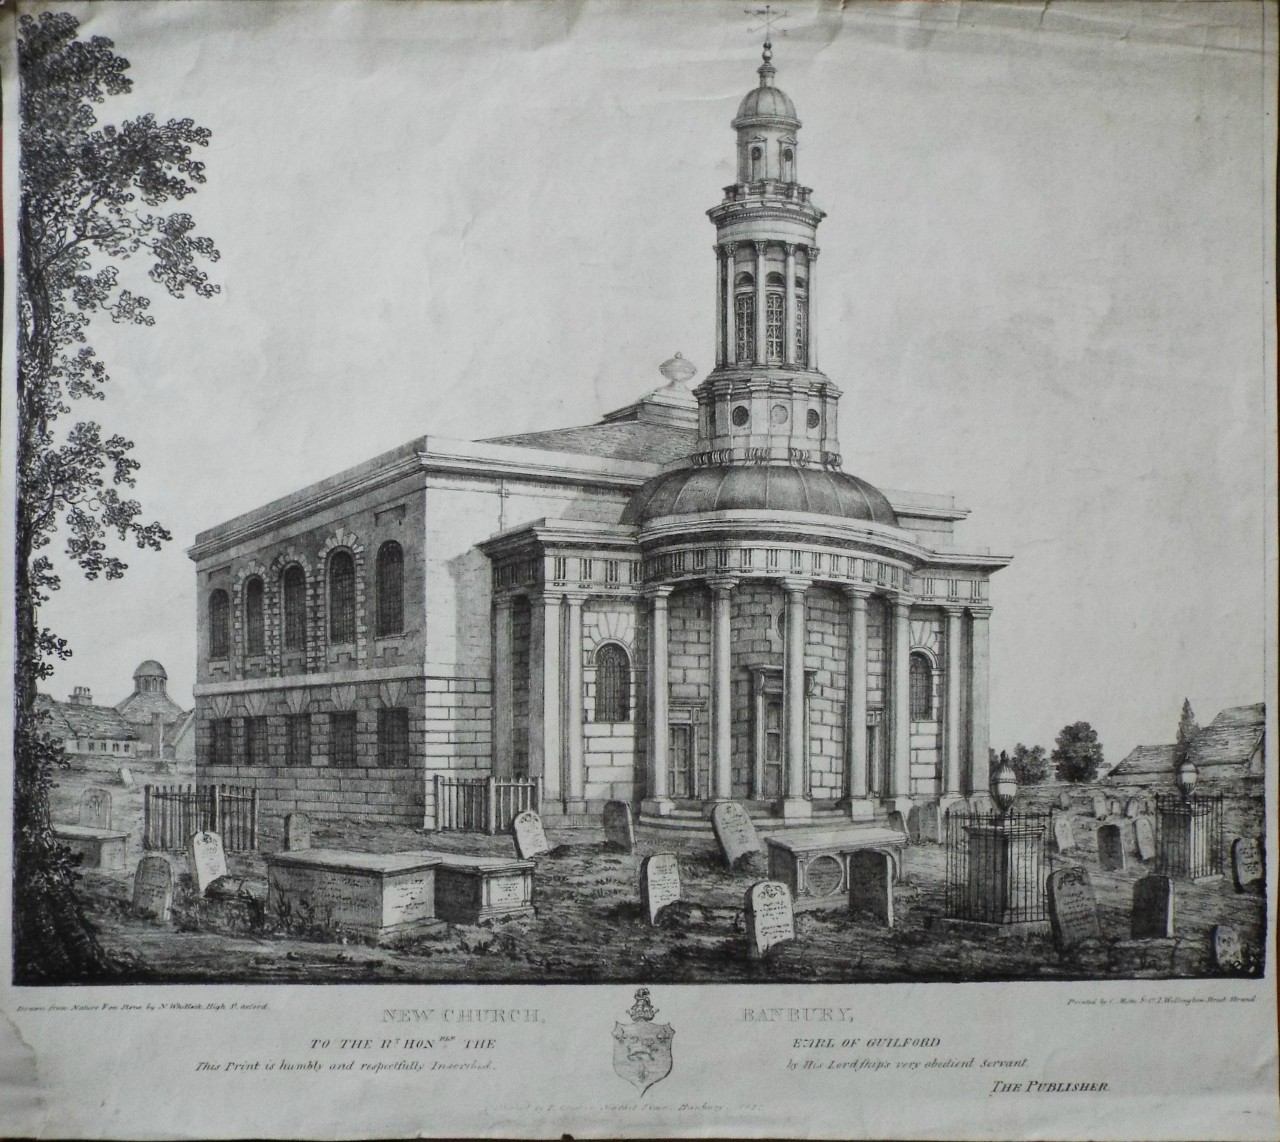 Lithograph - New Church, Banbury, to the Right Honble. the Earl of Guilford this print is humbly and respectfully Inscribed by His Lordship's very obedient servant, The Publisher. - Whittock